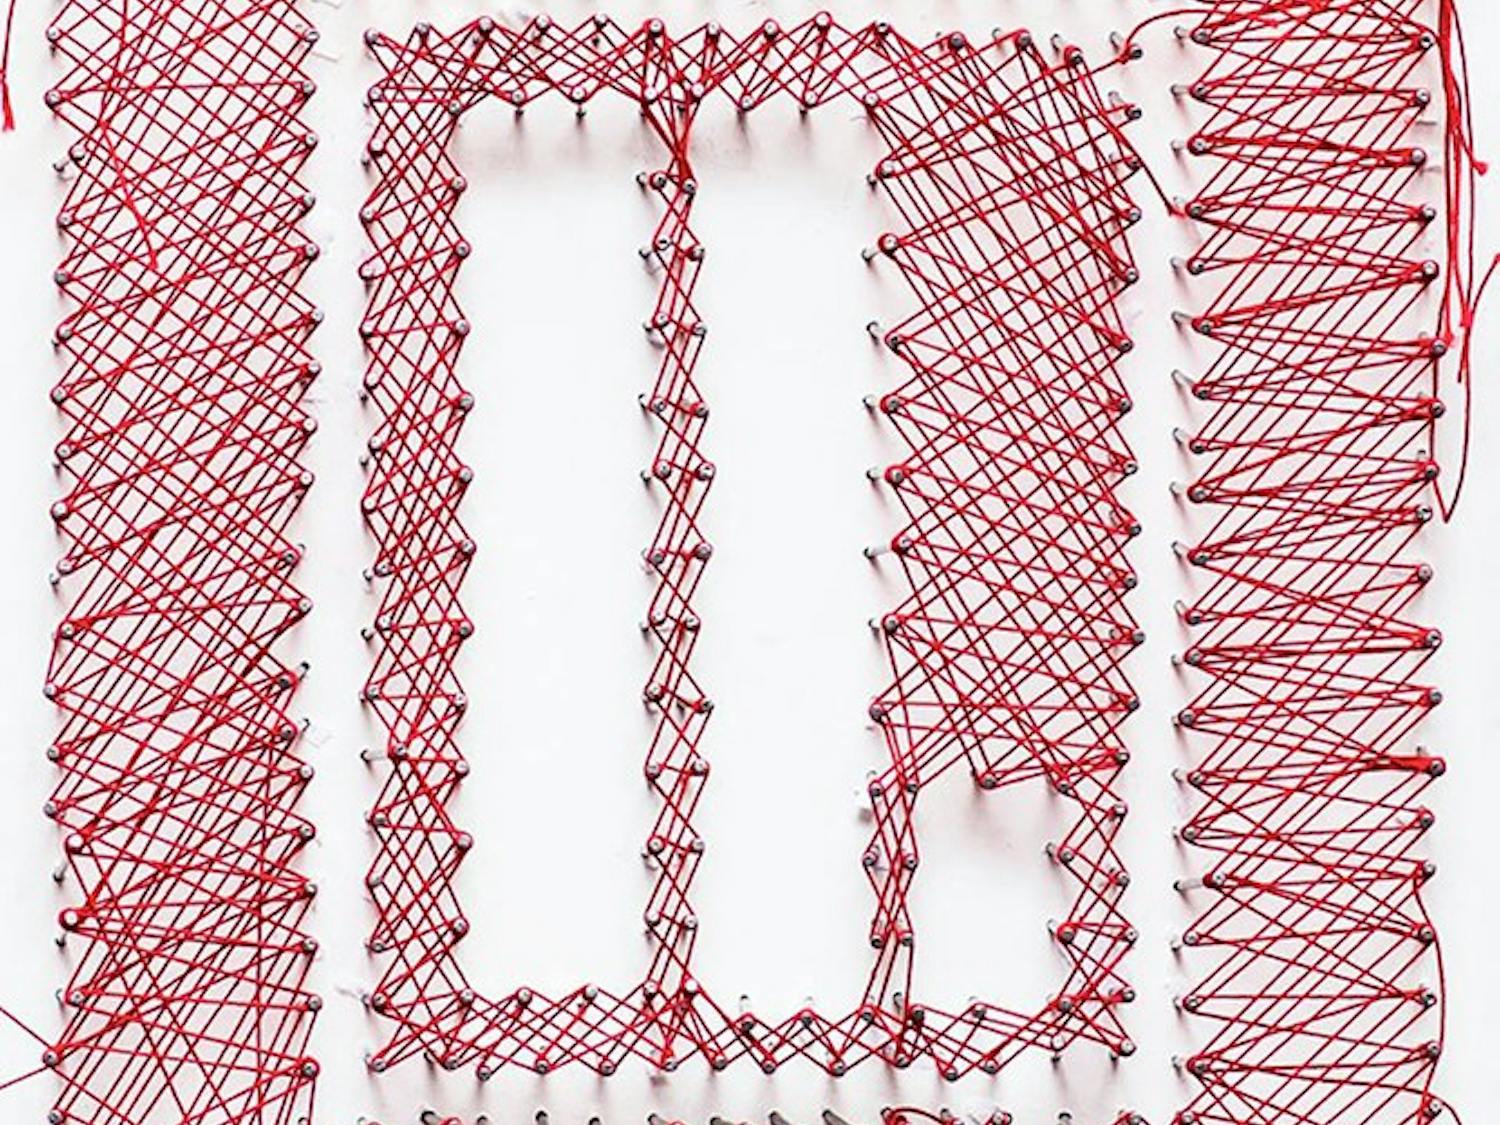 Although "If I'm The Devil..."&nbsp;has a few hidden gems, the album is repetitive overall and lacking of letlive's classic sound.